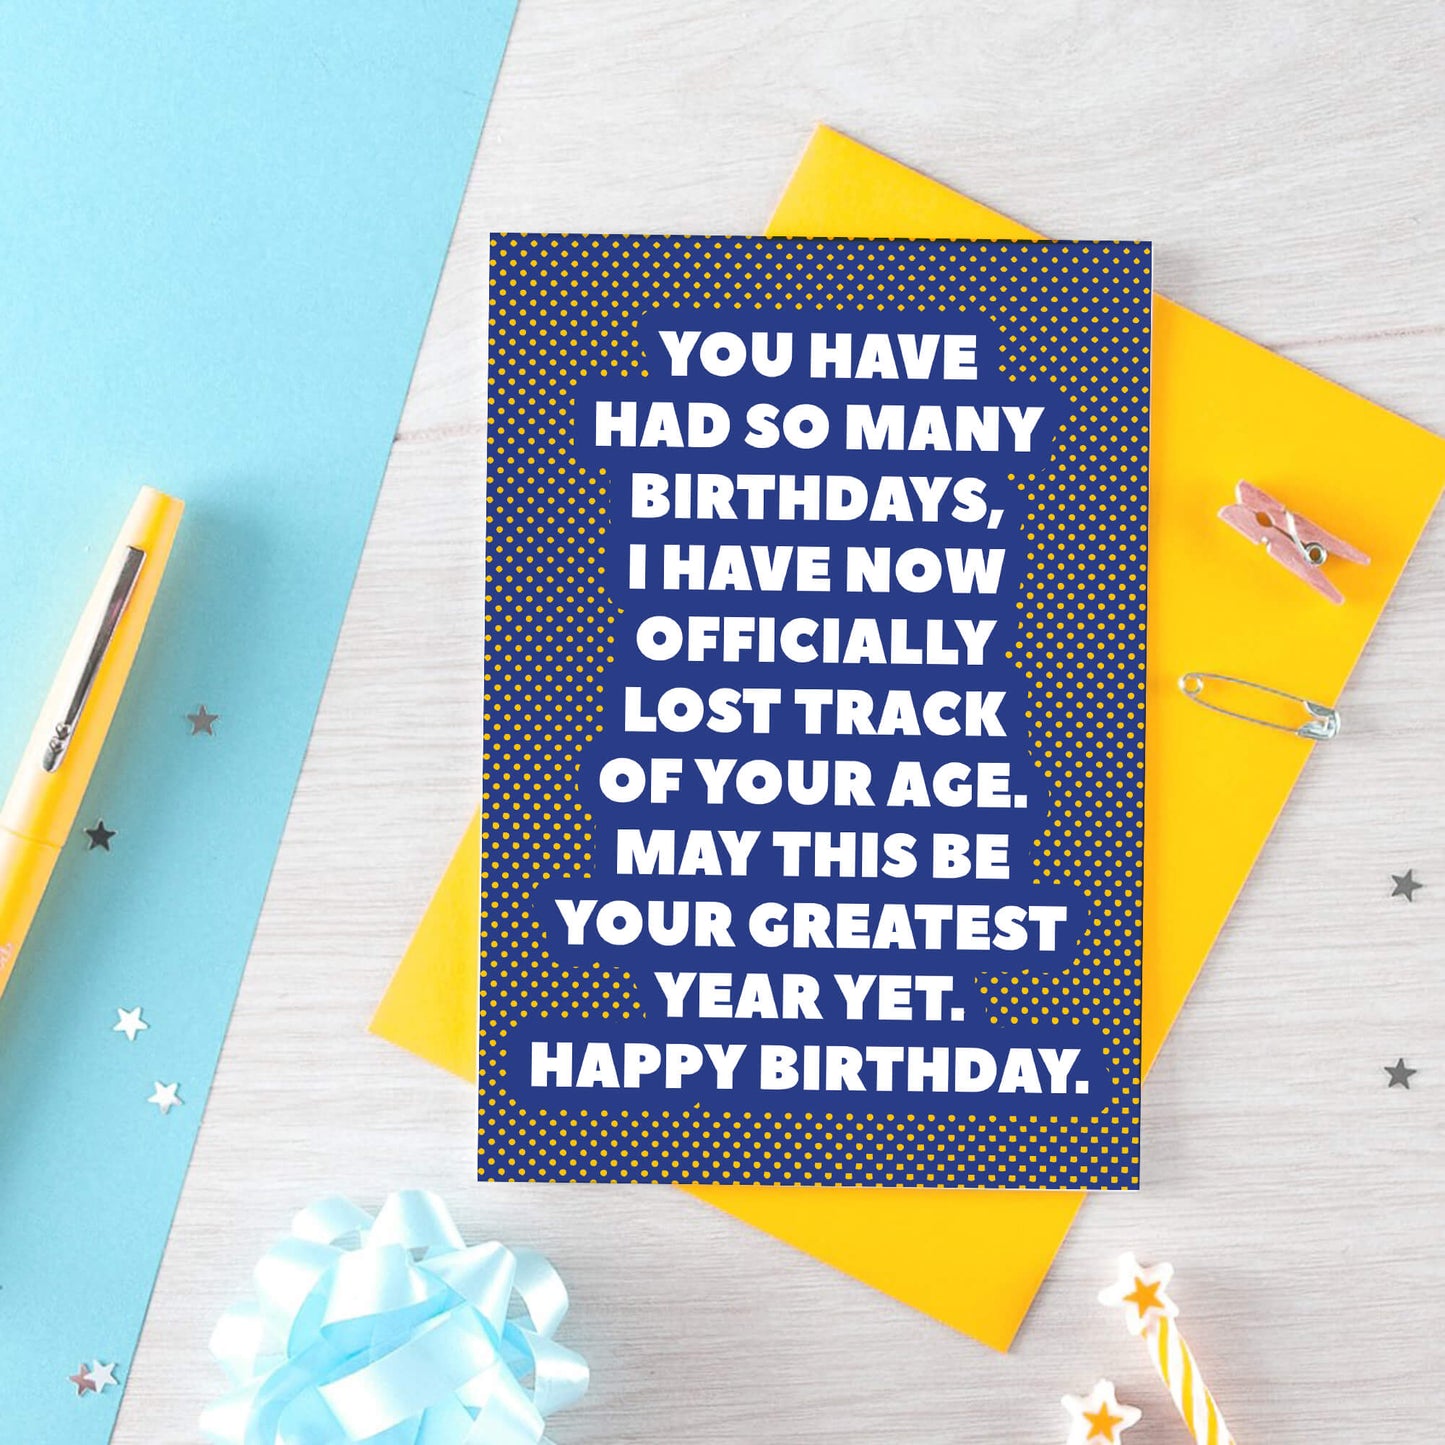 Birthday Card by SixElevenCreations. Reads You have had so many birthdays, I have now officially lost track of your age. May this be your greatest year yet. Happy birthday. Product Code SE2702A6